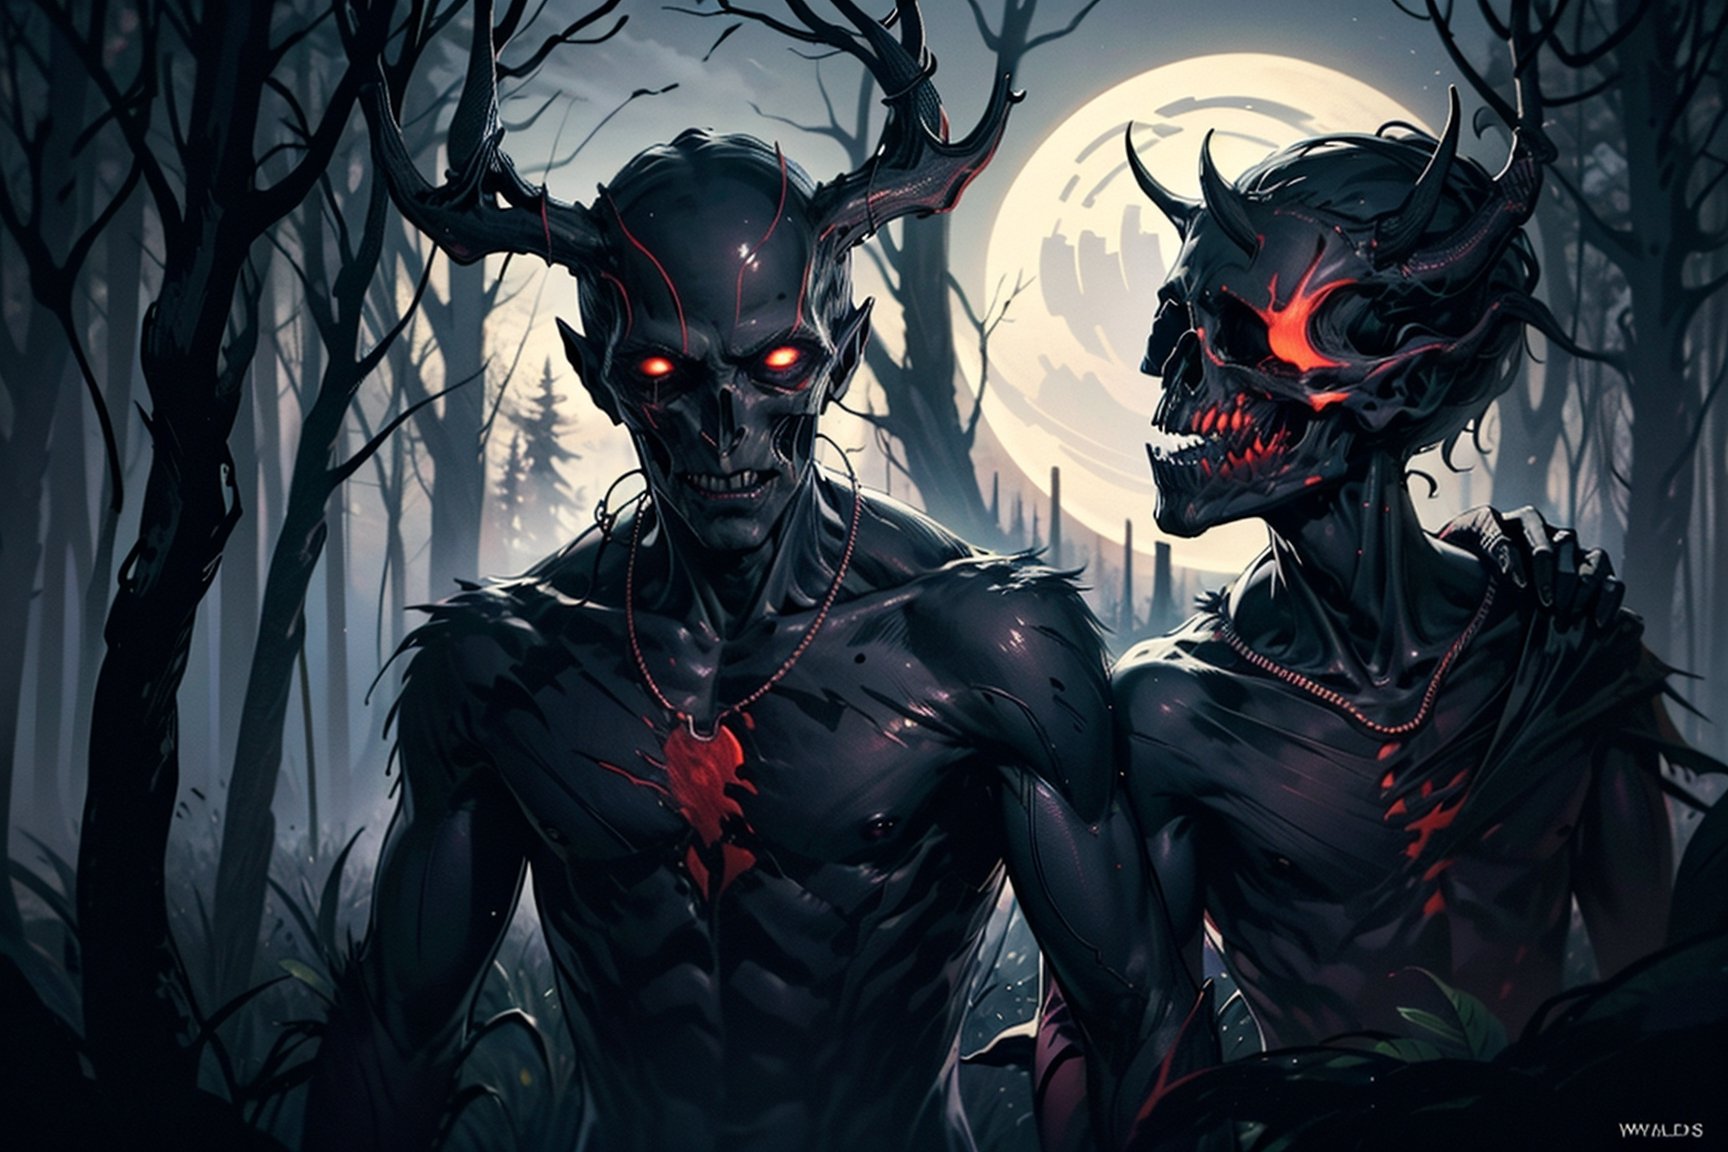 high definition, crisp quality, horror, dark, surreal, Weird, Wendigo, humanoid, extremely foggy, misty, cloudy_sky, night, trees around,monster, moving between the trees, creepy, Graphic novel,xyzabcwalls